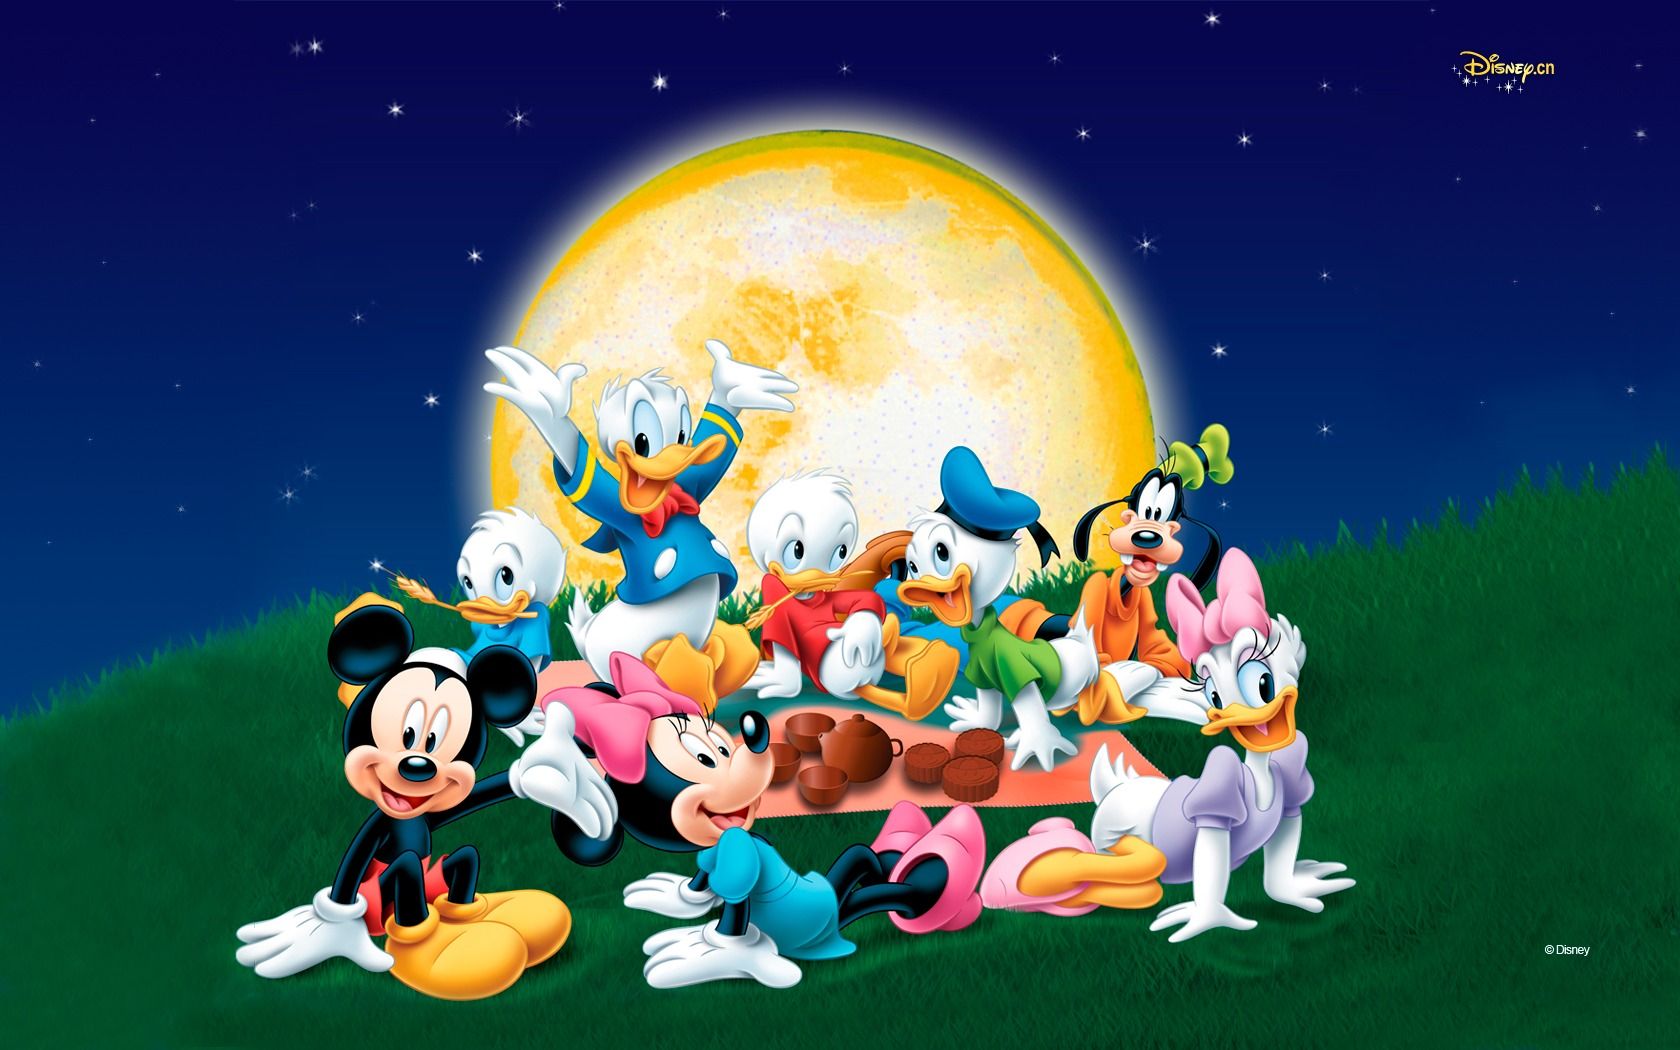 A group of disney characters are sitting on the grass - Minnie Mouse